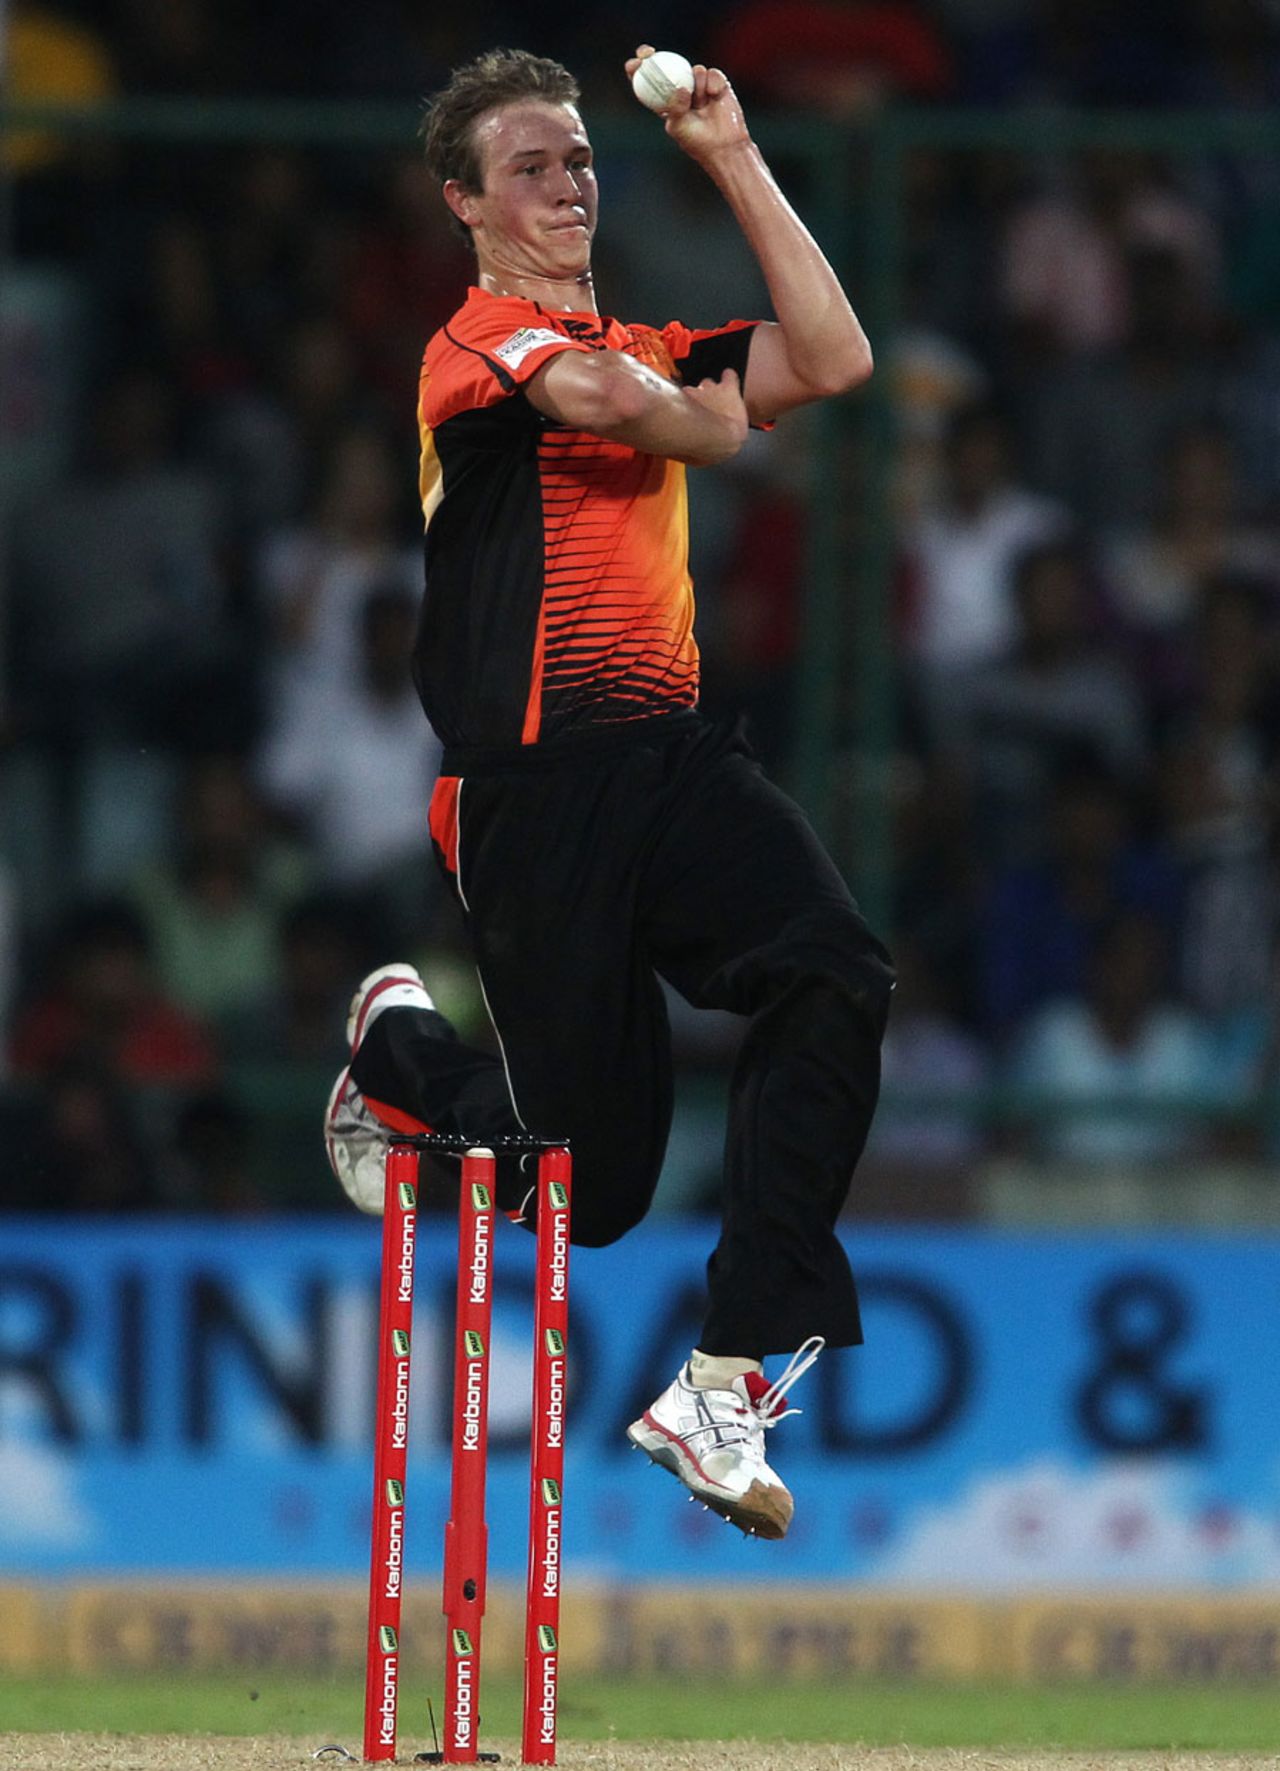 Joel Paris in his delivery stride, Mumbai Indians v Perth Scorchers, Champions League 2013, Group A, Delhi, October 2, 2013 